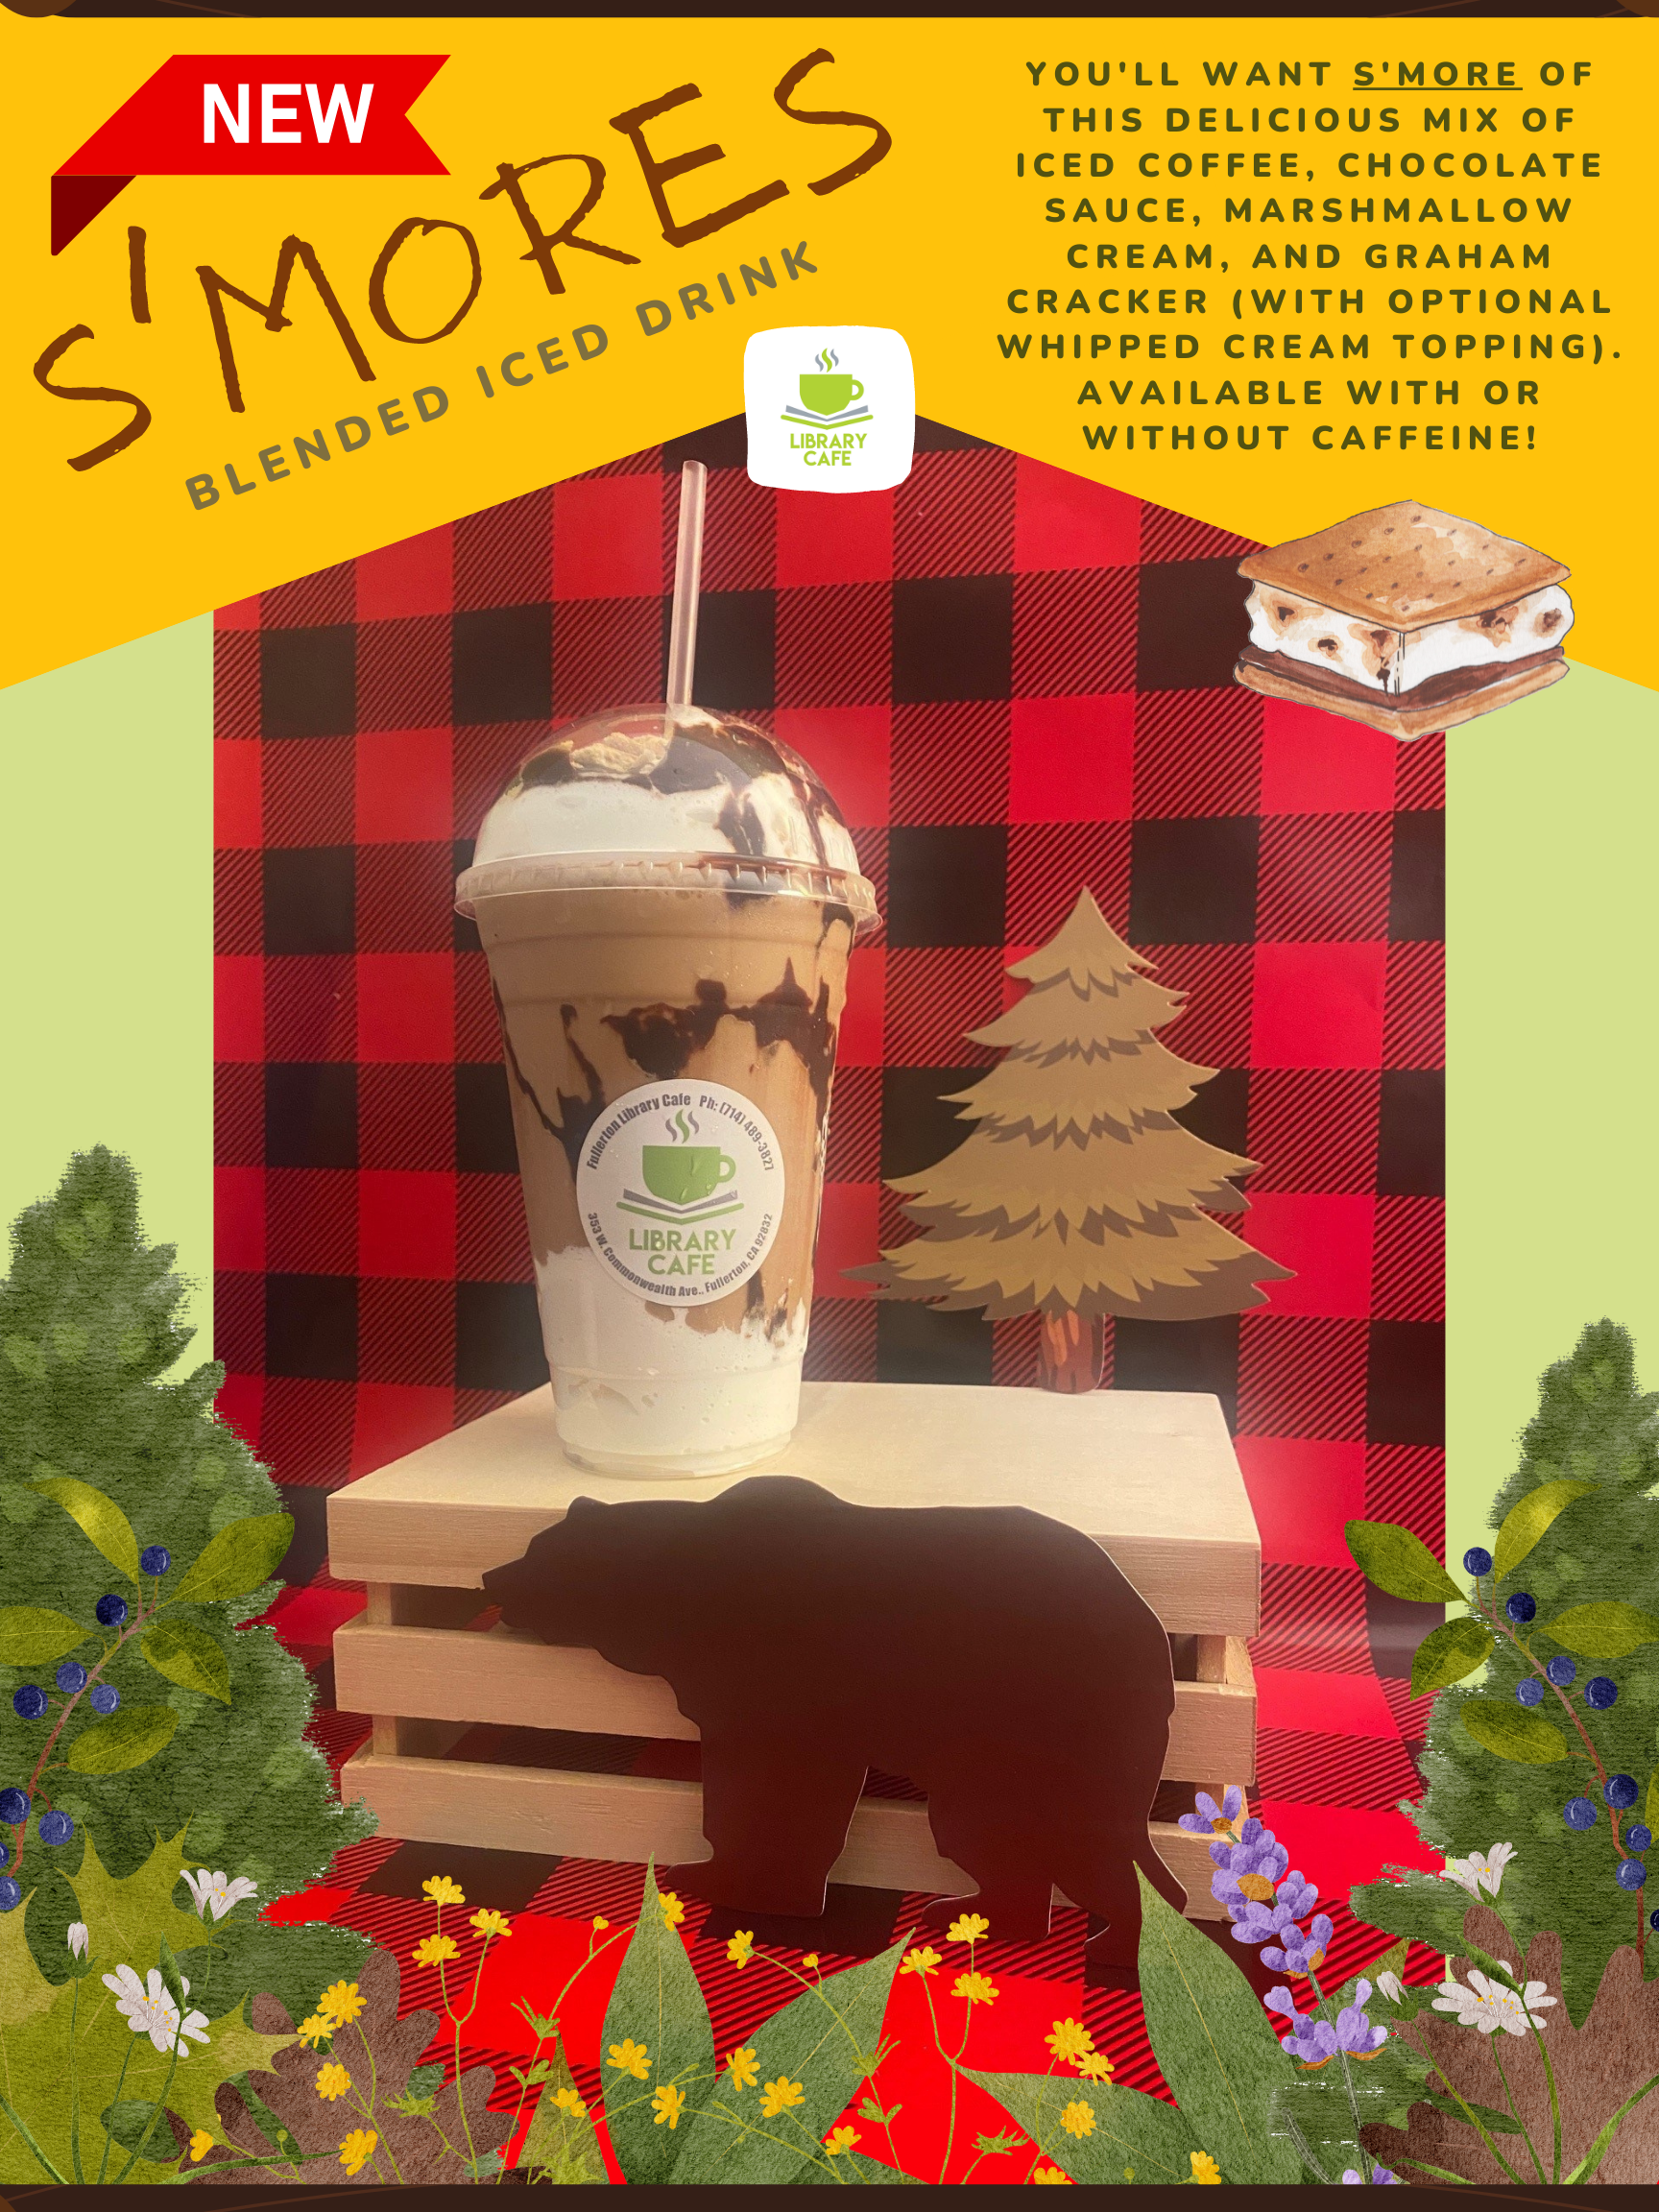 S'Mores blended ice drink at Library Cafe